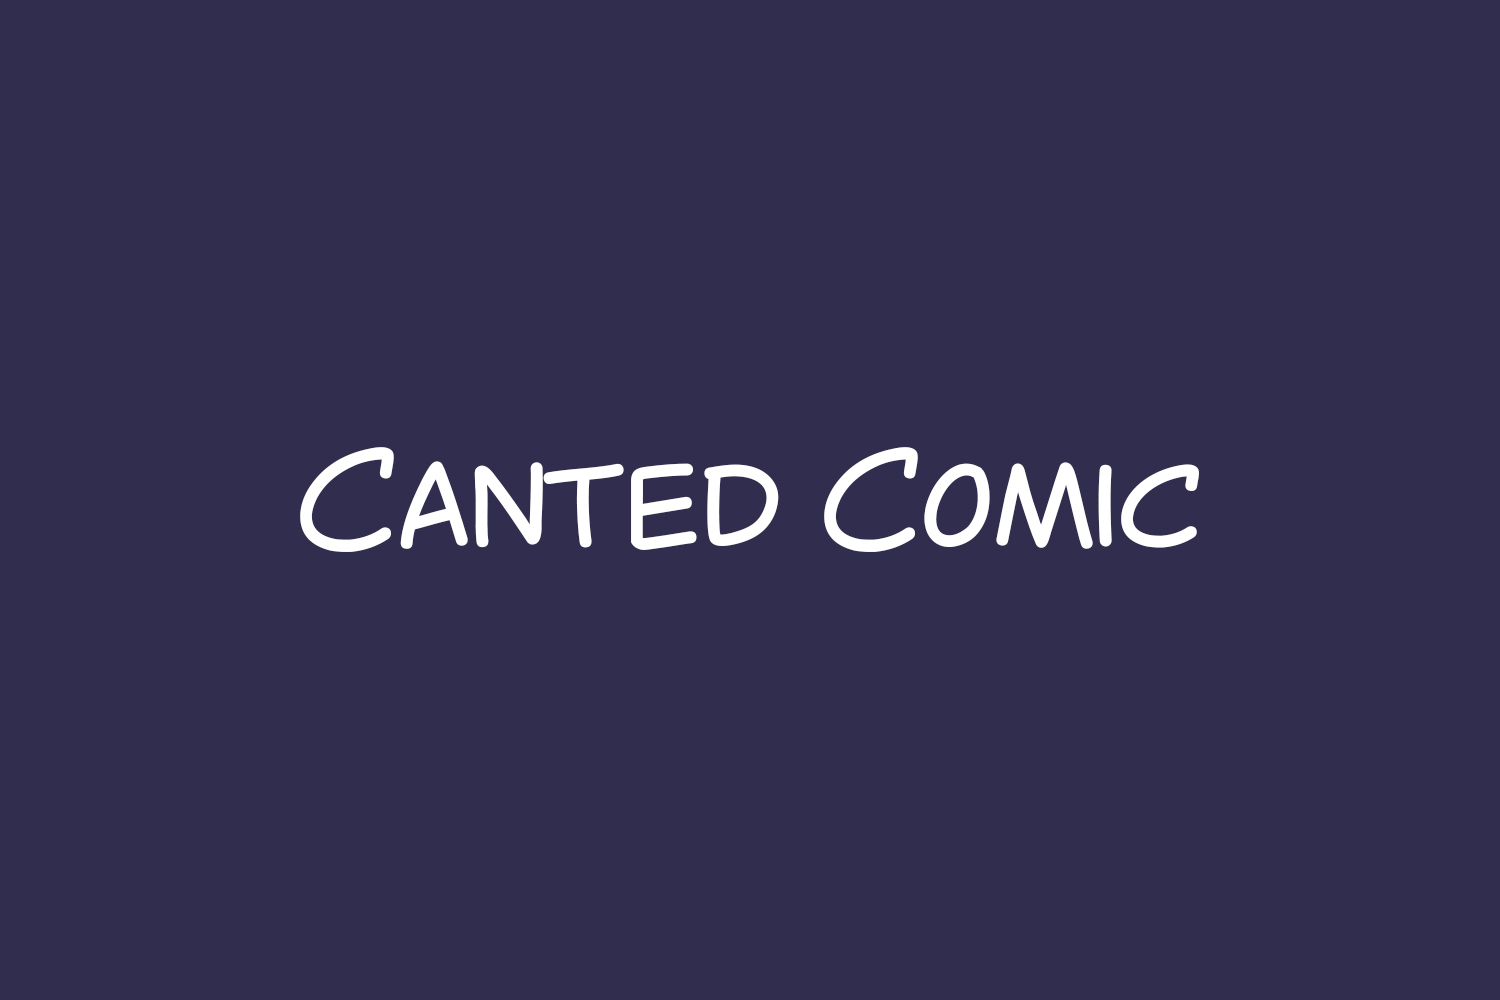 Canted Comic Free Font